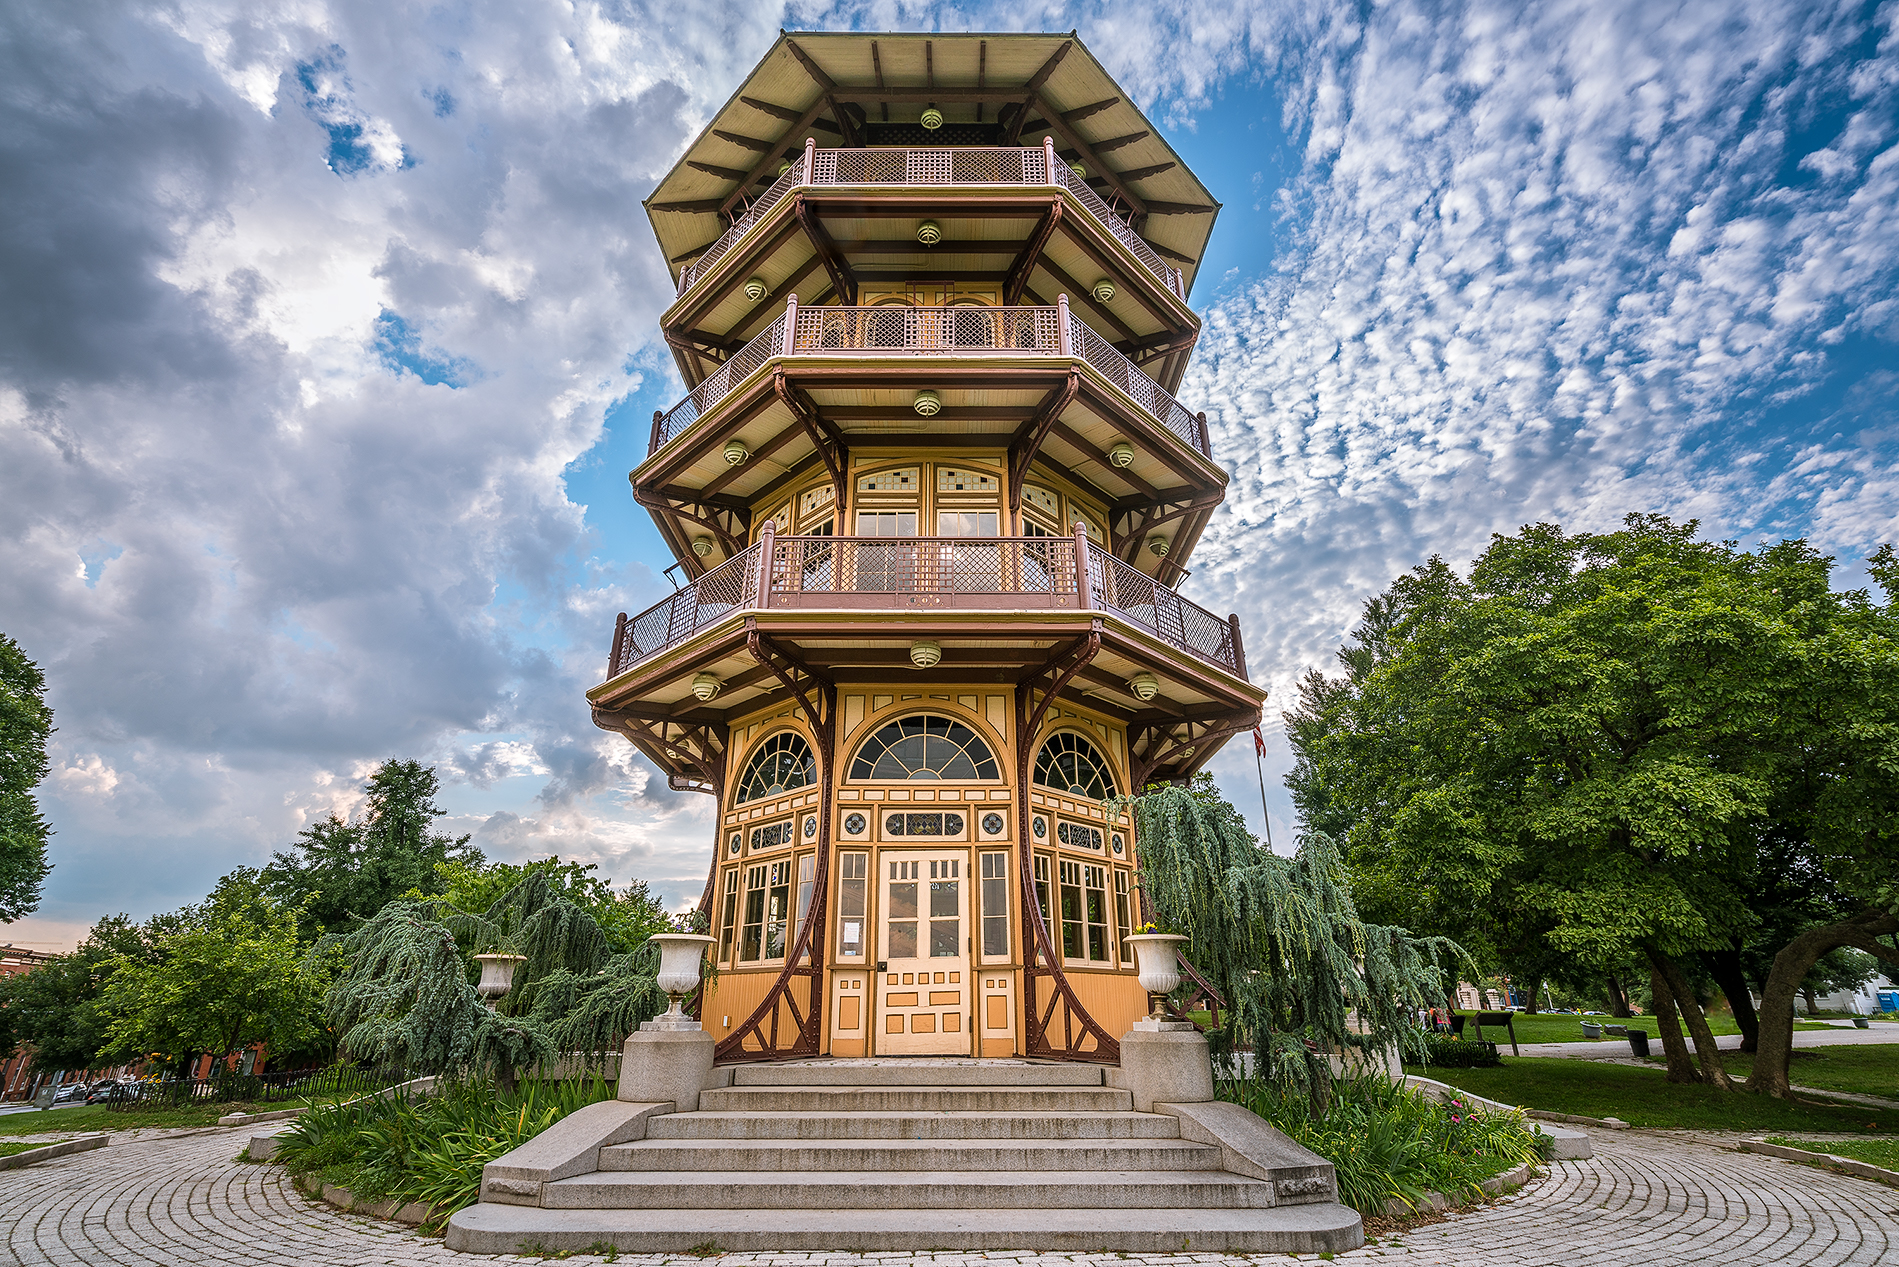  Did you know...it requires $50,000 annually to maintain and staff the Pagoda Observatory, so that we can keep it open and free to the public? Your support is needed! 